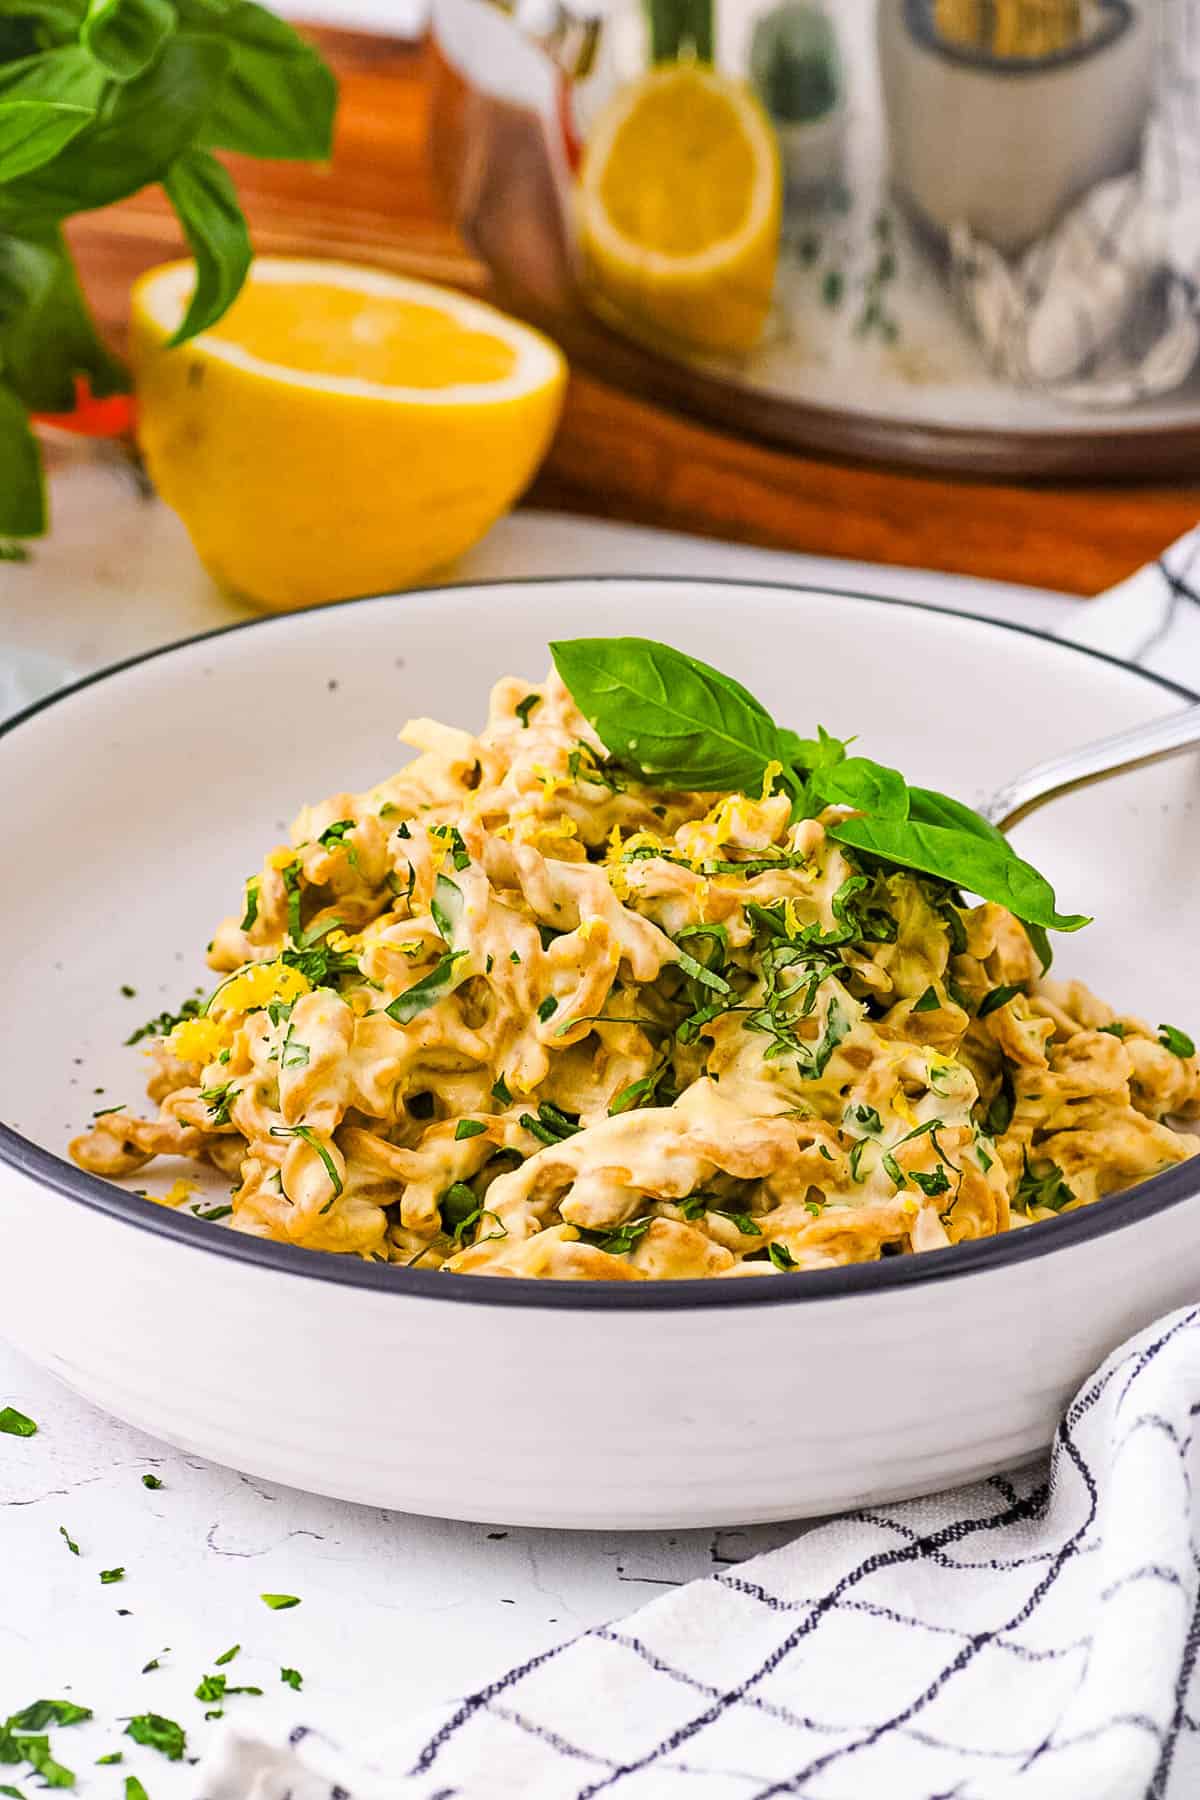 Tahini pasta, served in a white bowl, garnished with fresh herbs.